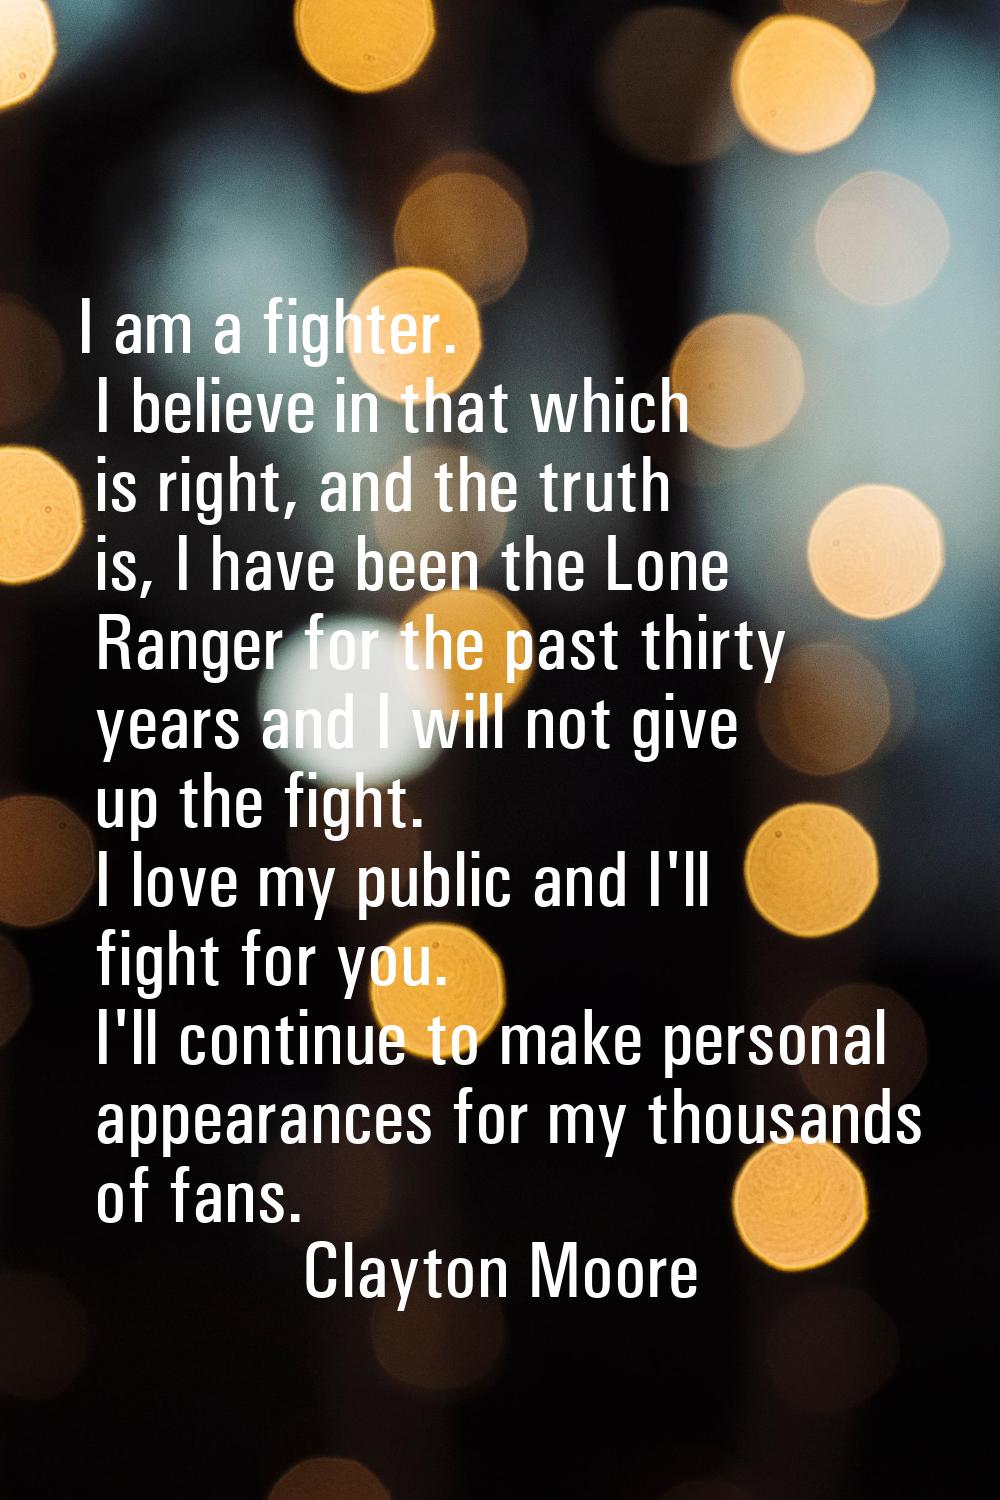 I am a fighter. I believe in that which is right, and the truth is, I have been the Lone Ranger for